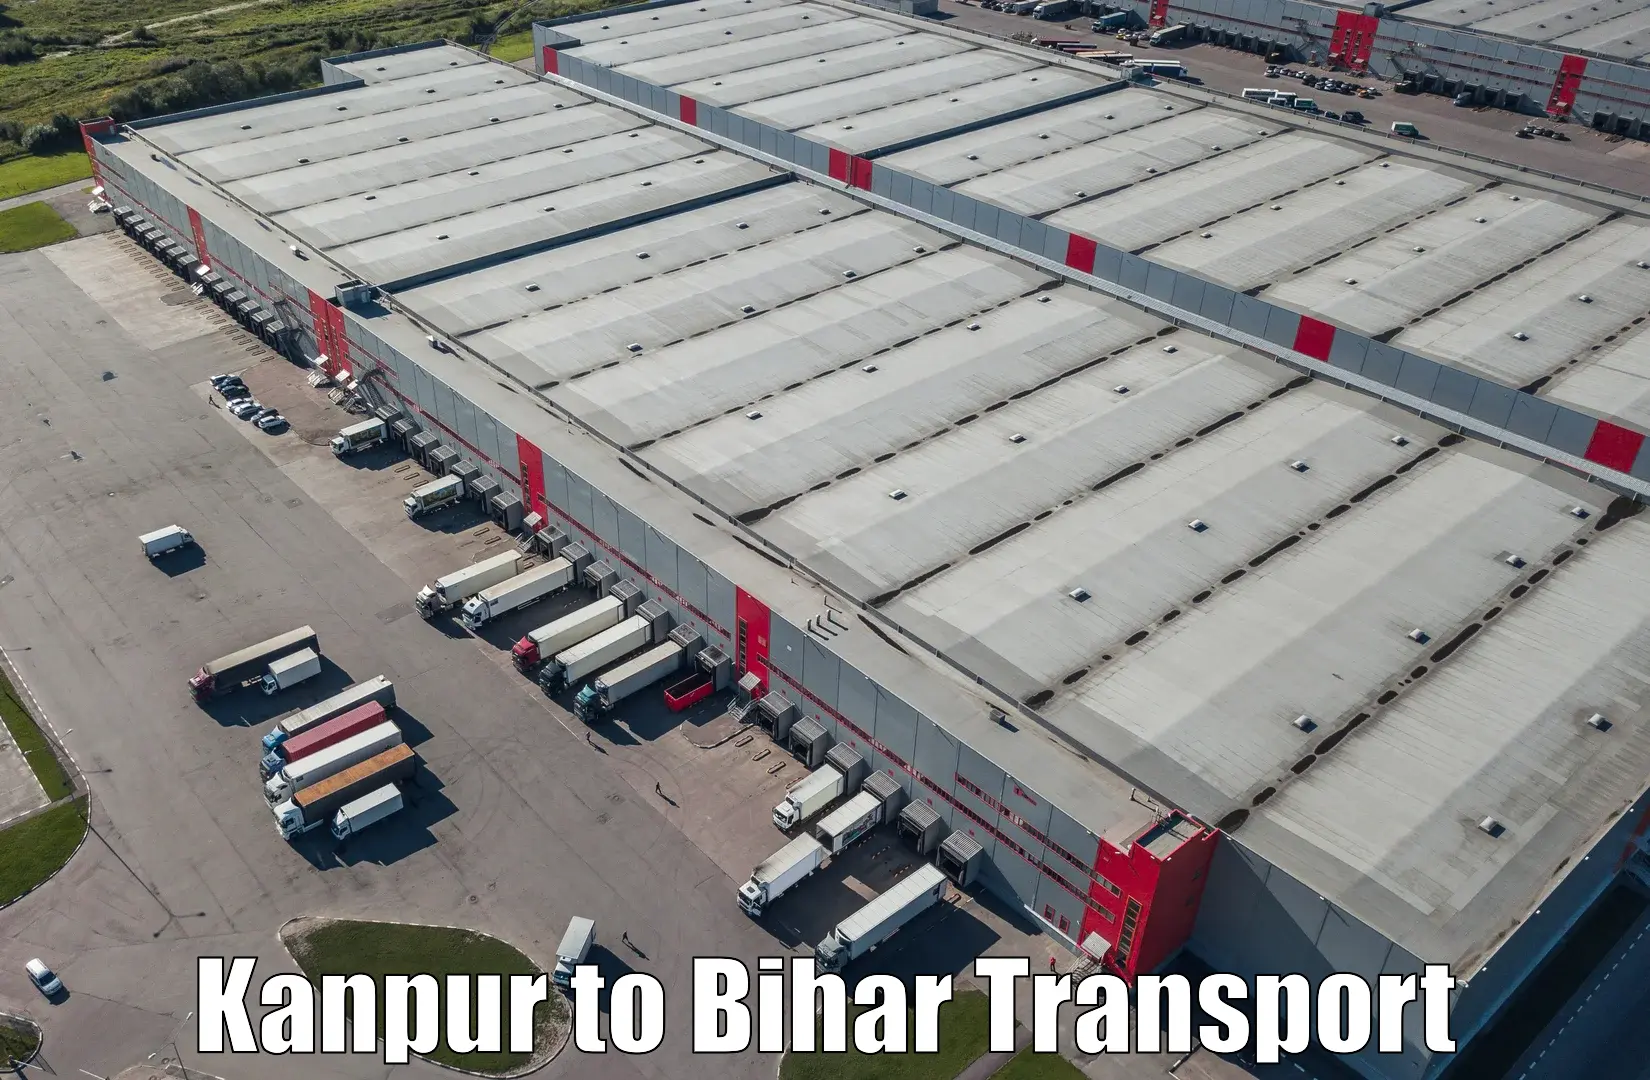 Express transport services Kanpur to Gauripur